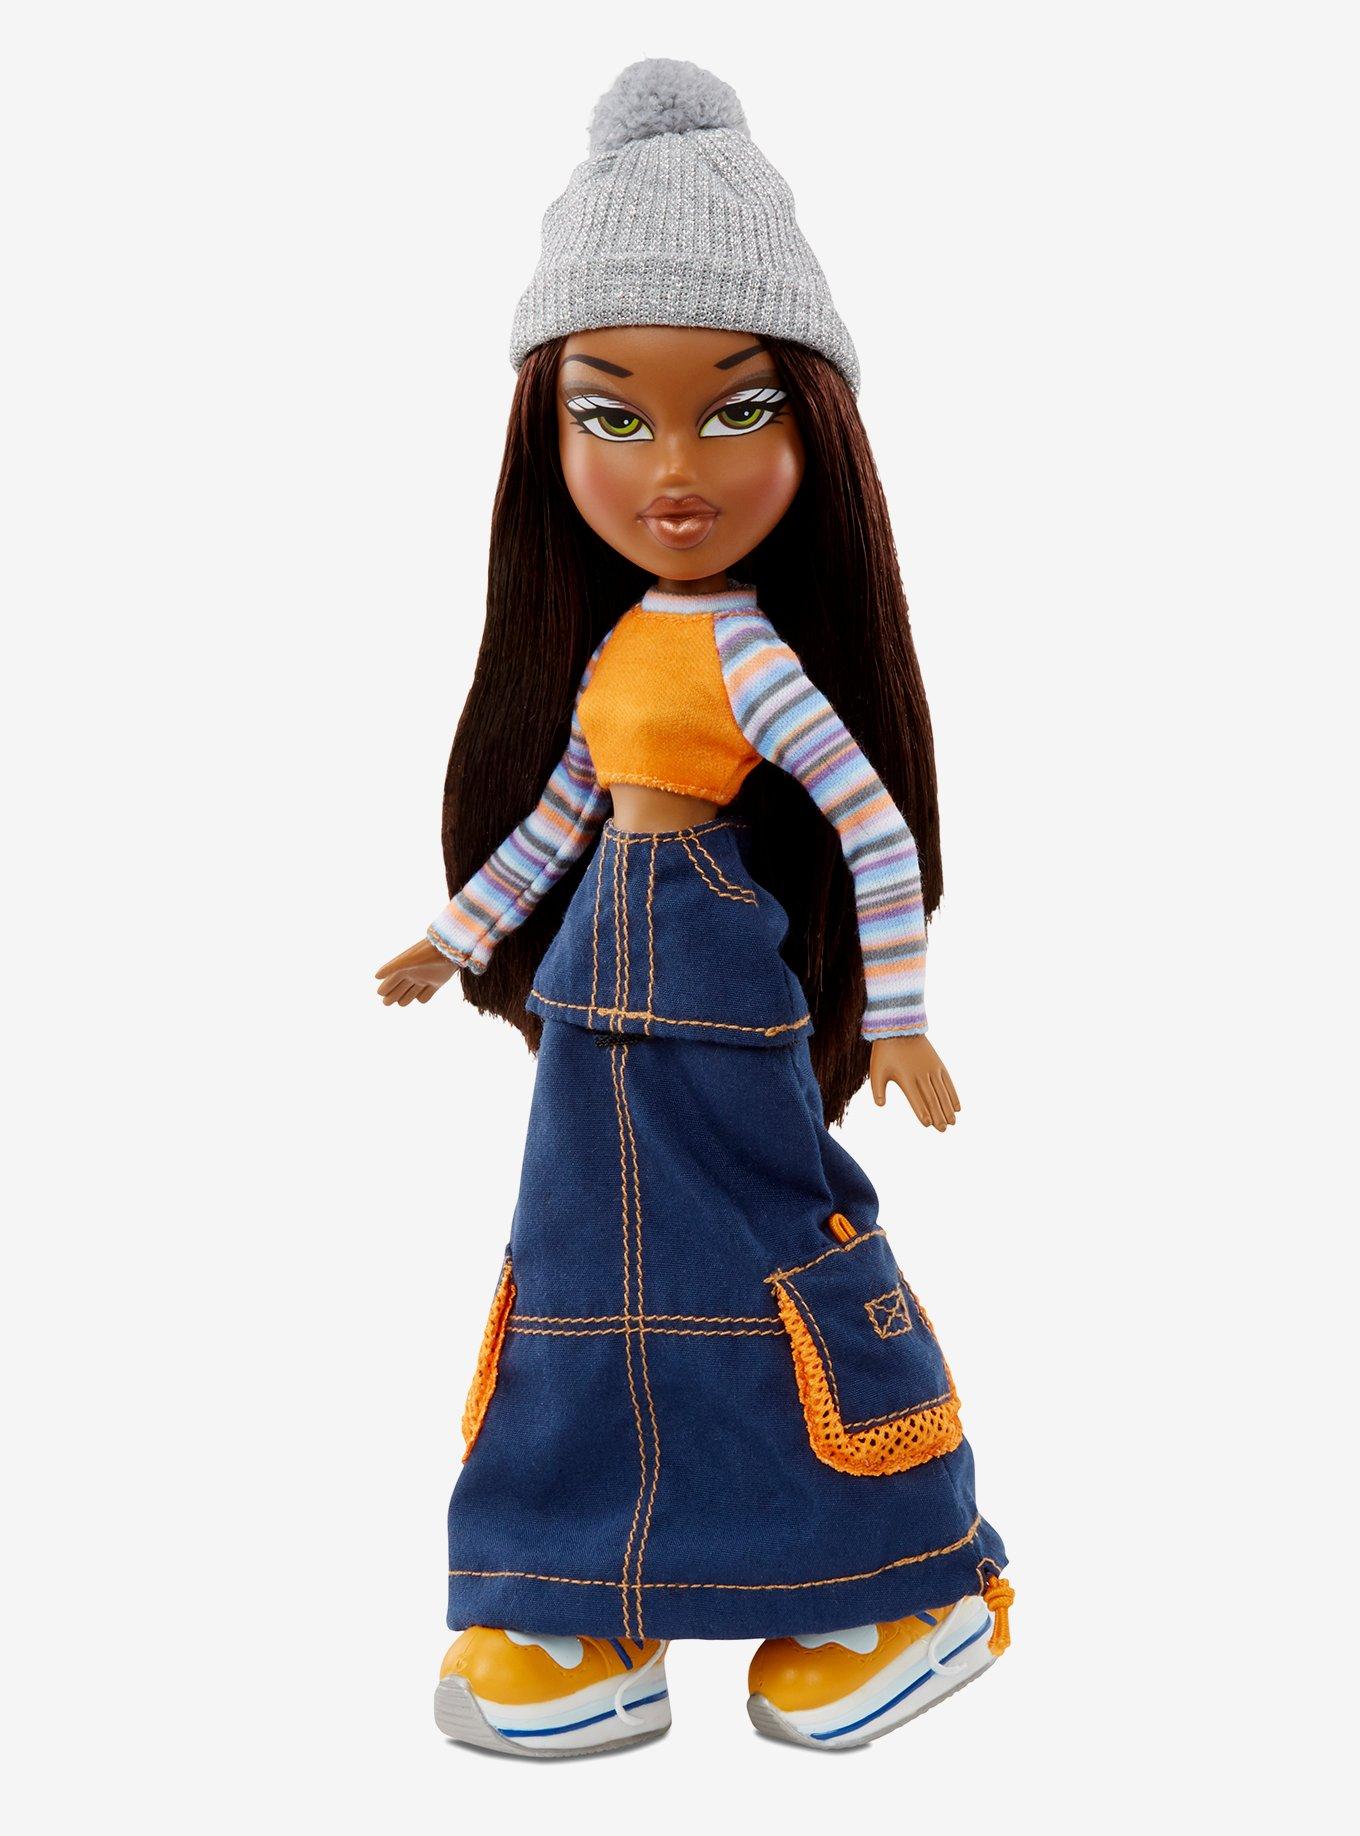 Sasha Dolls Buy Online, Outfits and Accessories